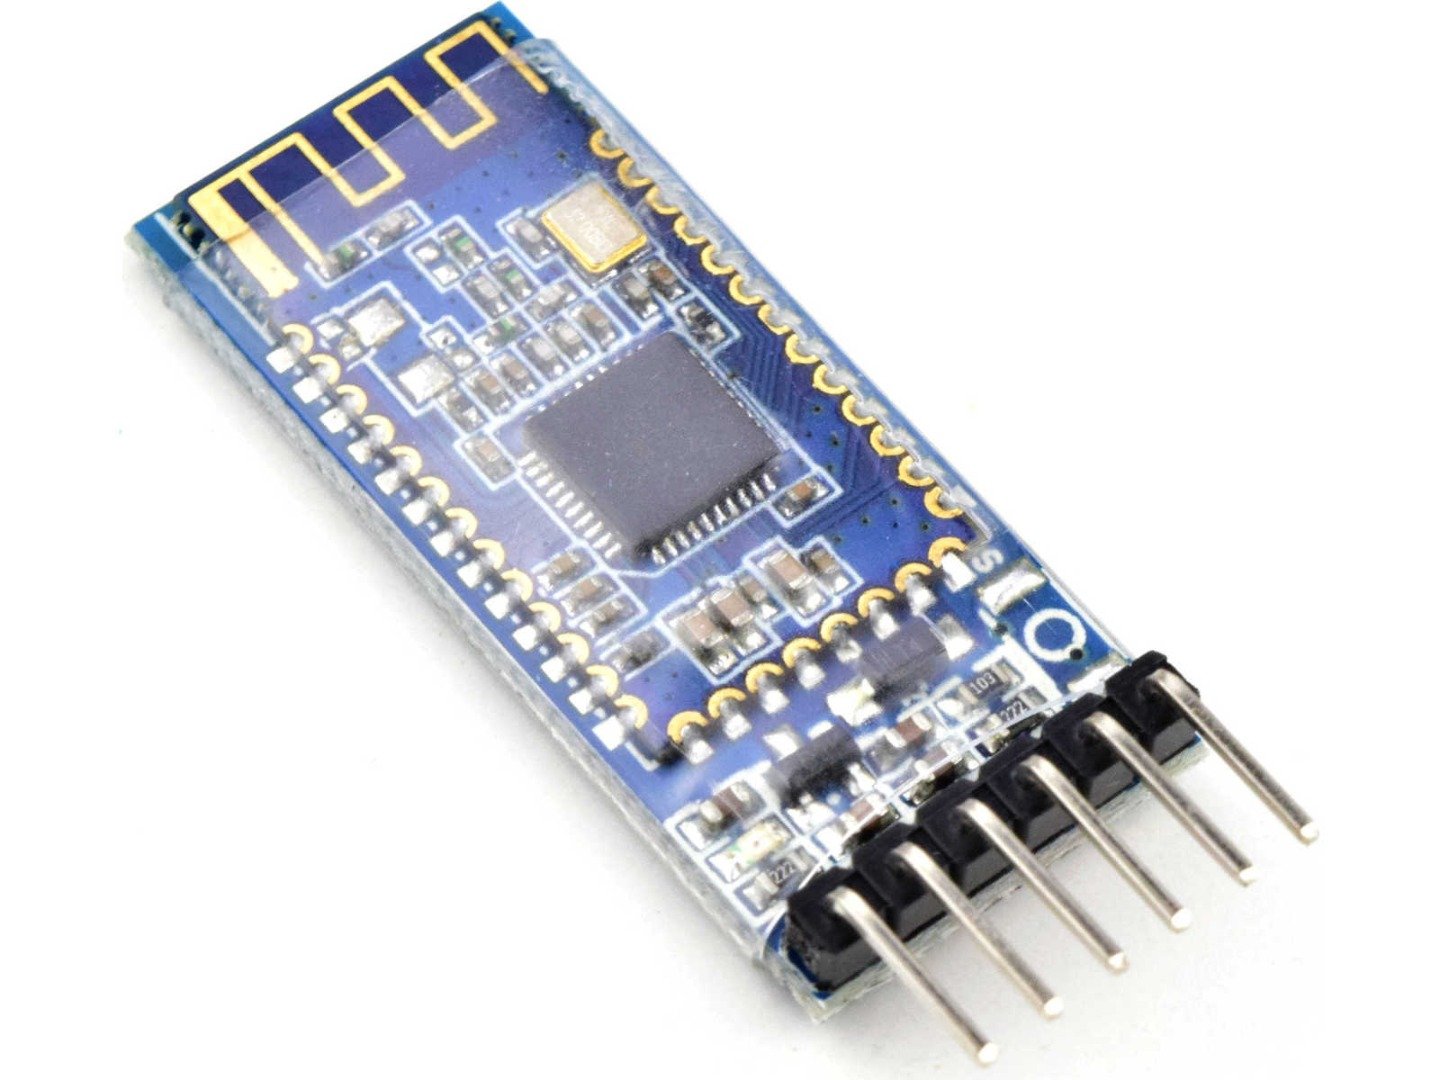 HC-10 Bluetooth 4.0 BLE Module with TI CC2541 chipset 6